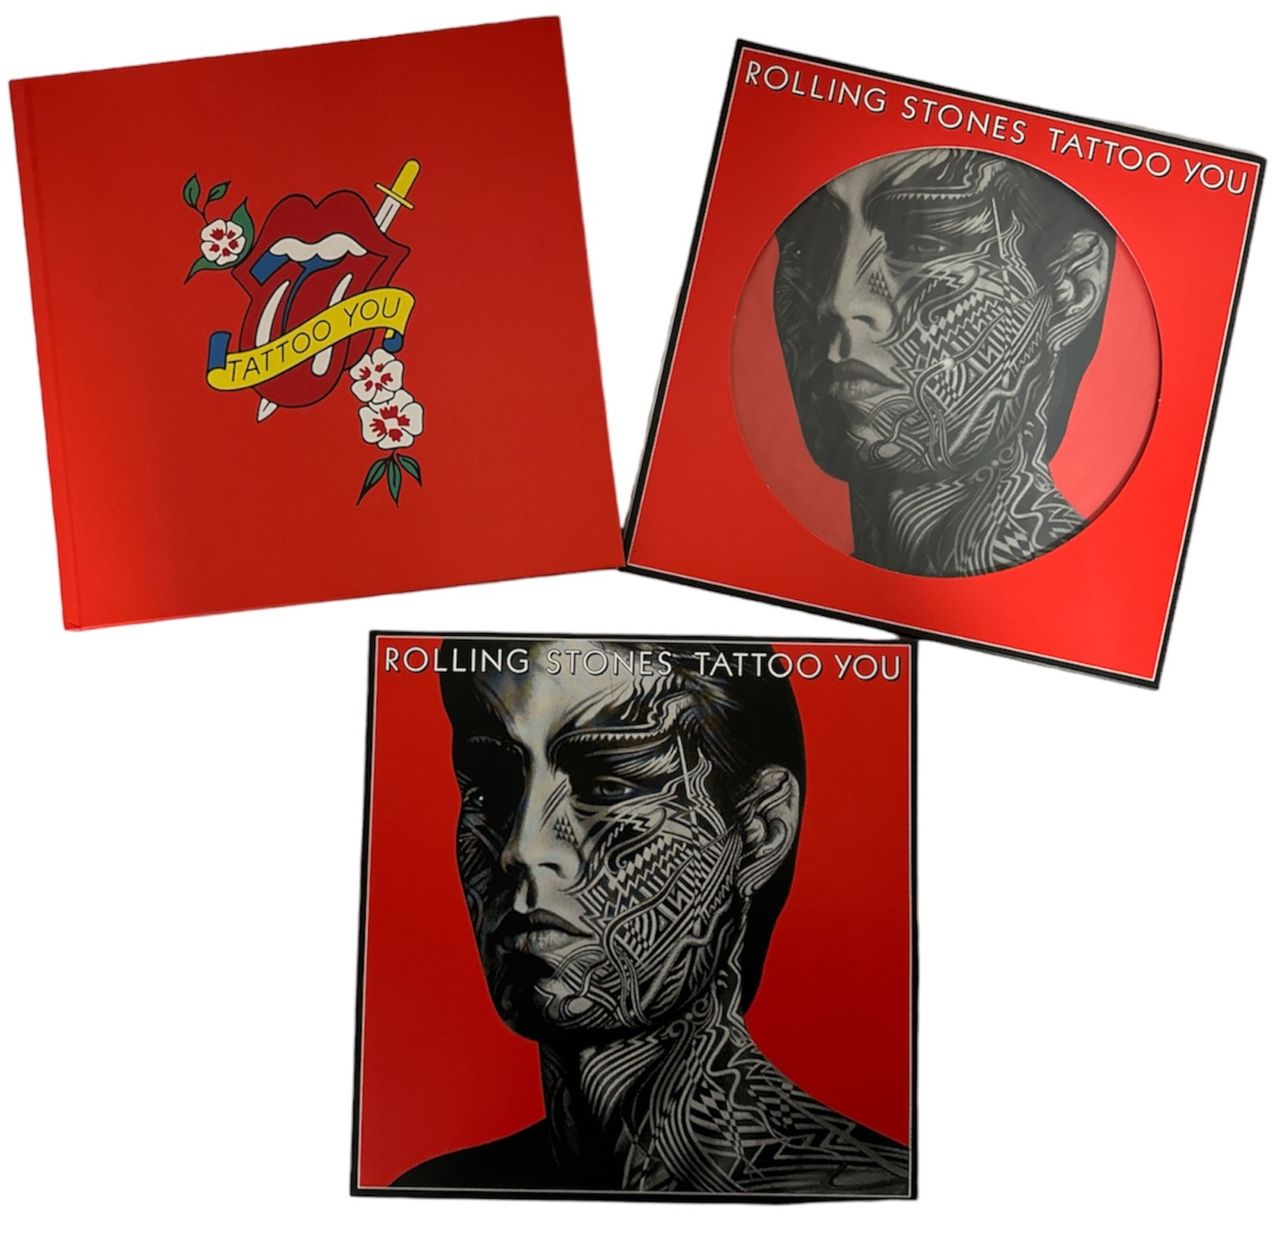 The Rolling Stones Tattoo You Super Deluxe Edition 4-CD Box Set UK C — 